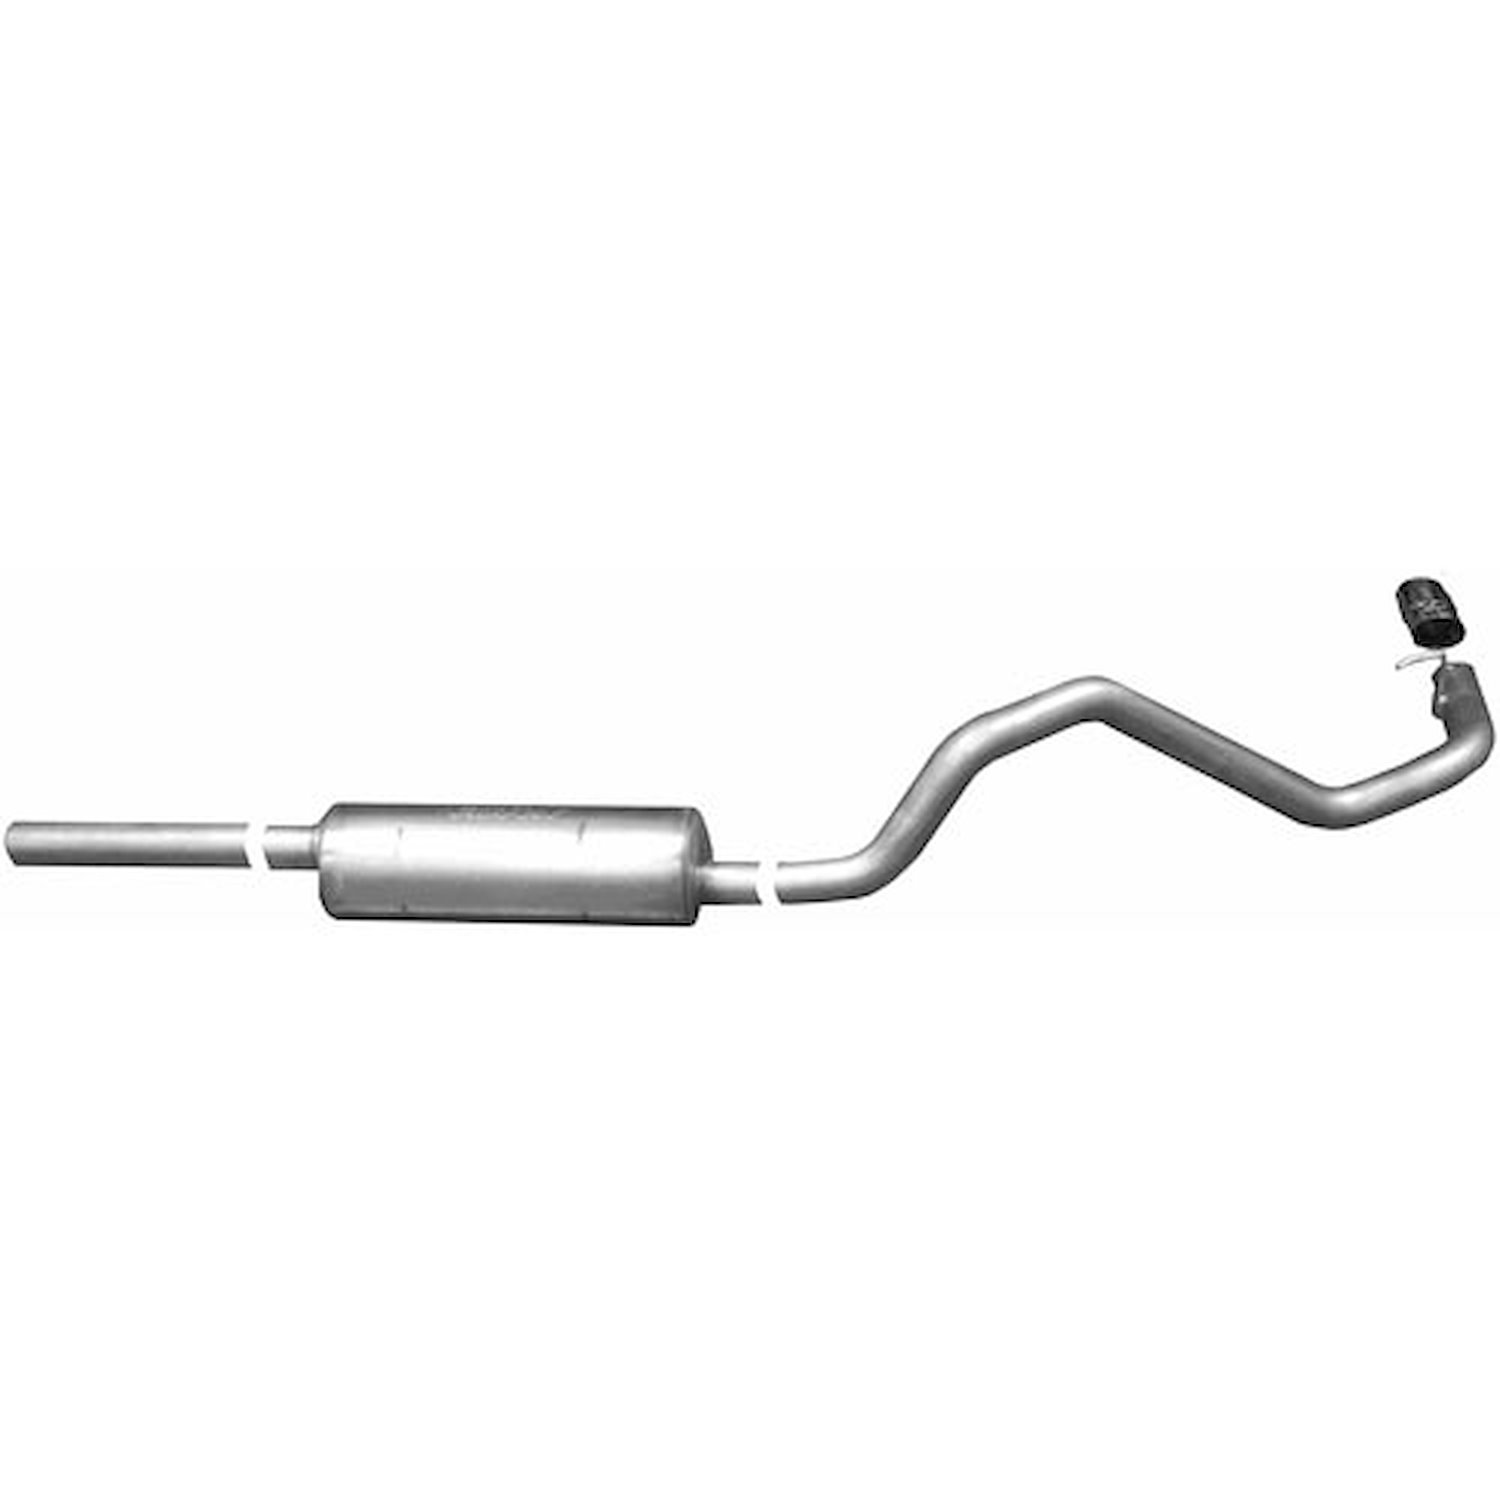 Swept-Side Cat-Back Exhaust 1998-2000 Toyota Tacoma TRD 3.4L 2WD/4WD